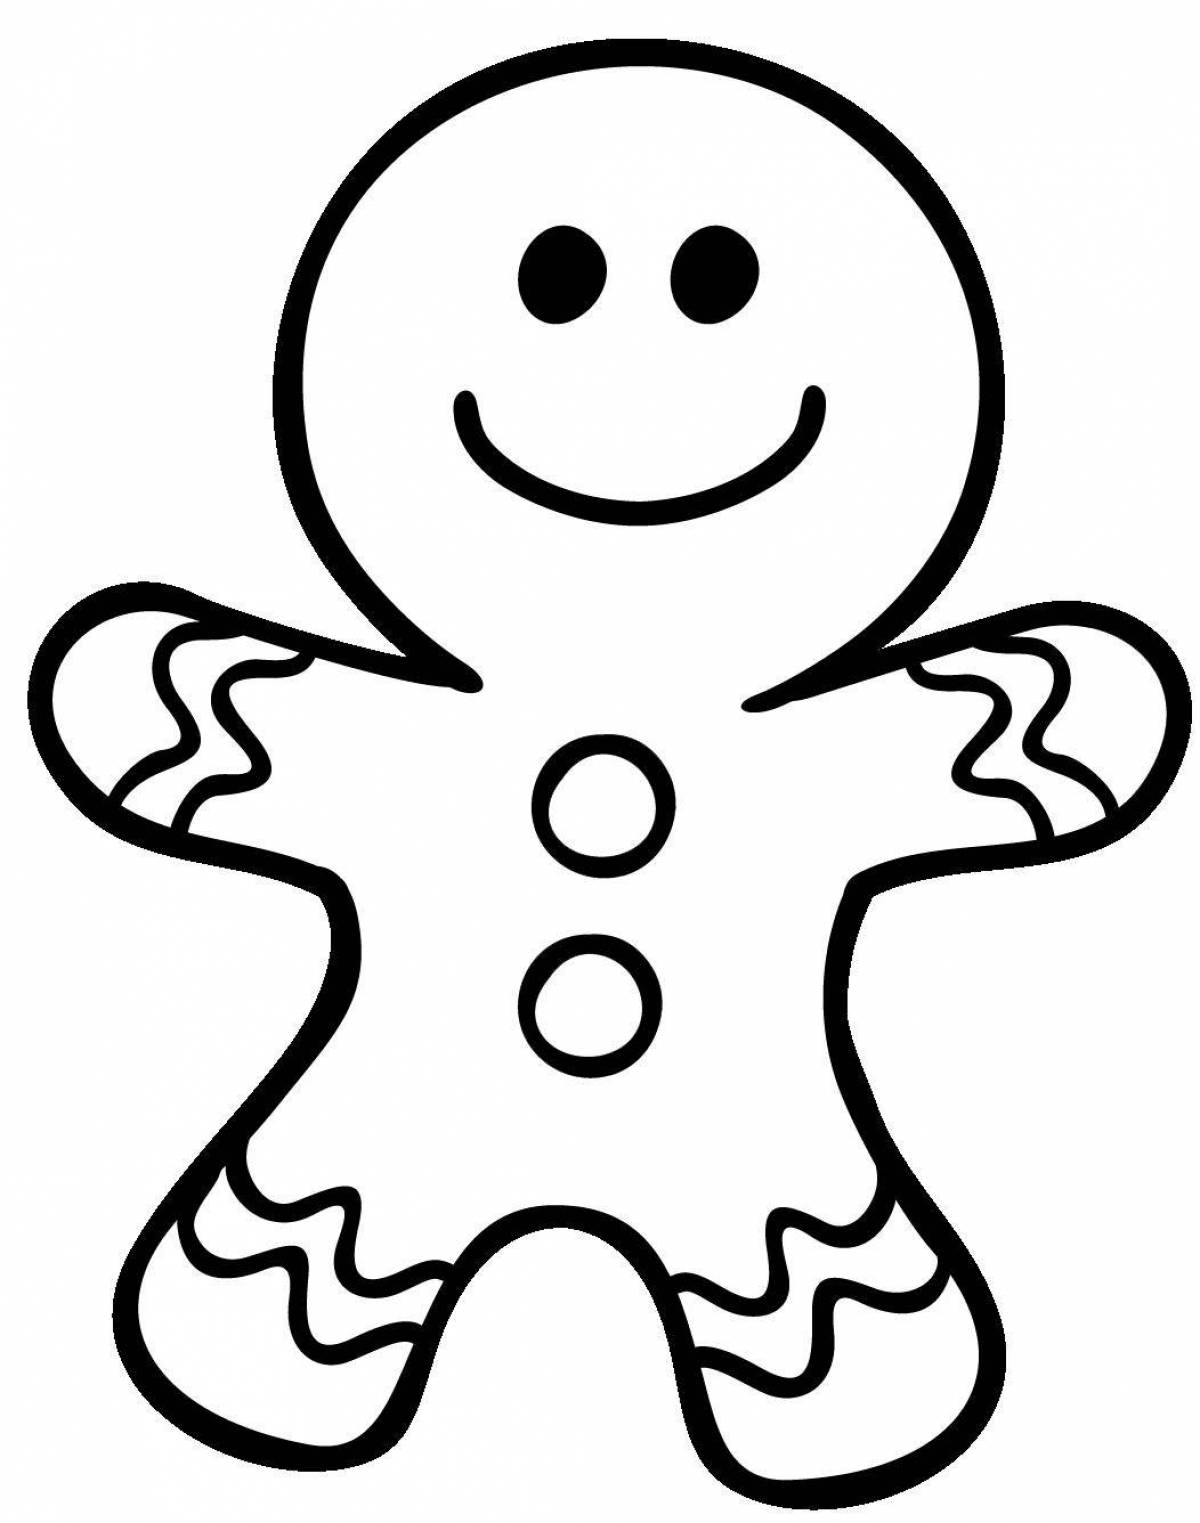 Impressive gingerbread man coloring page